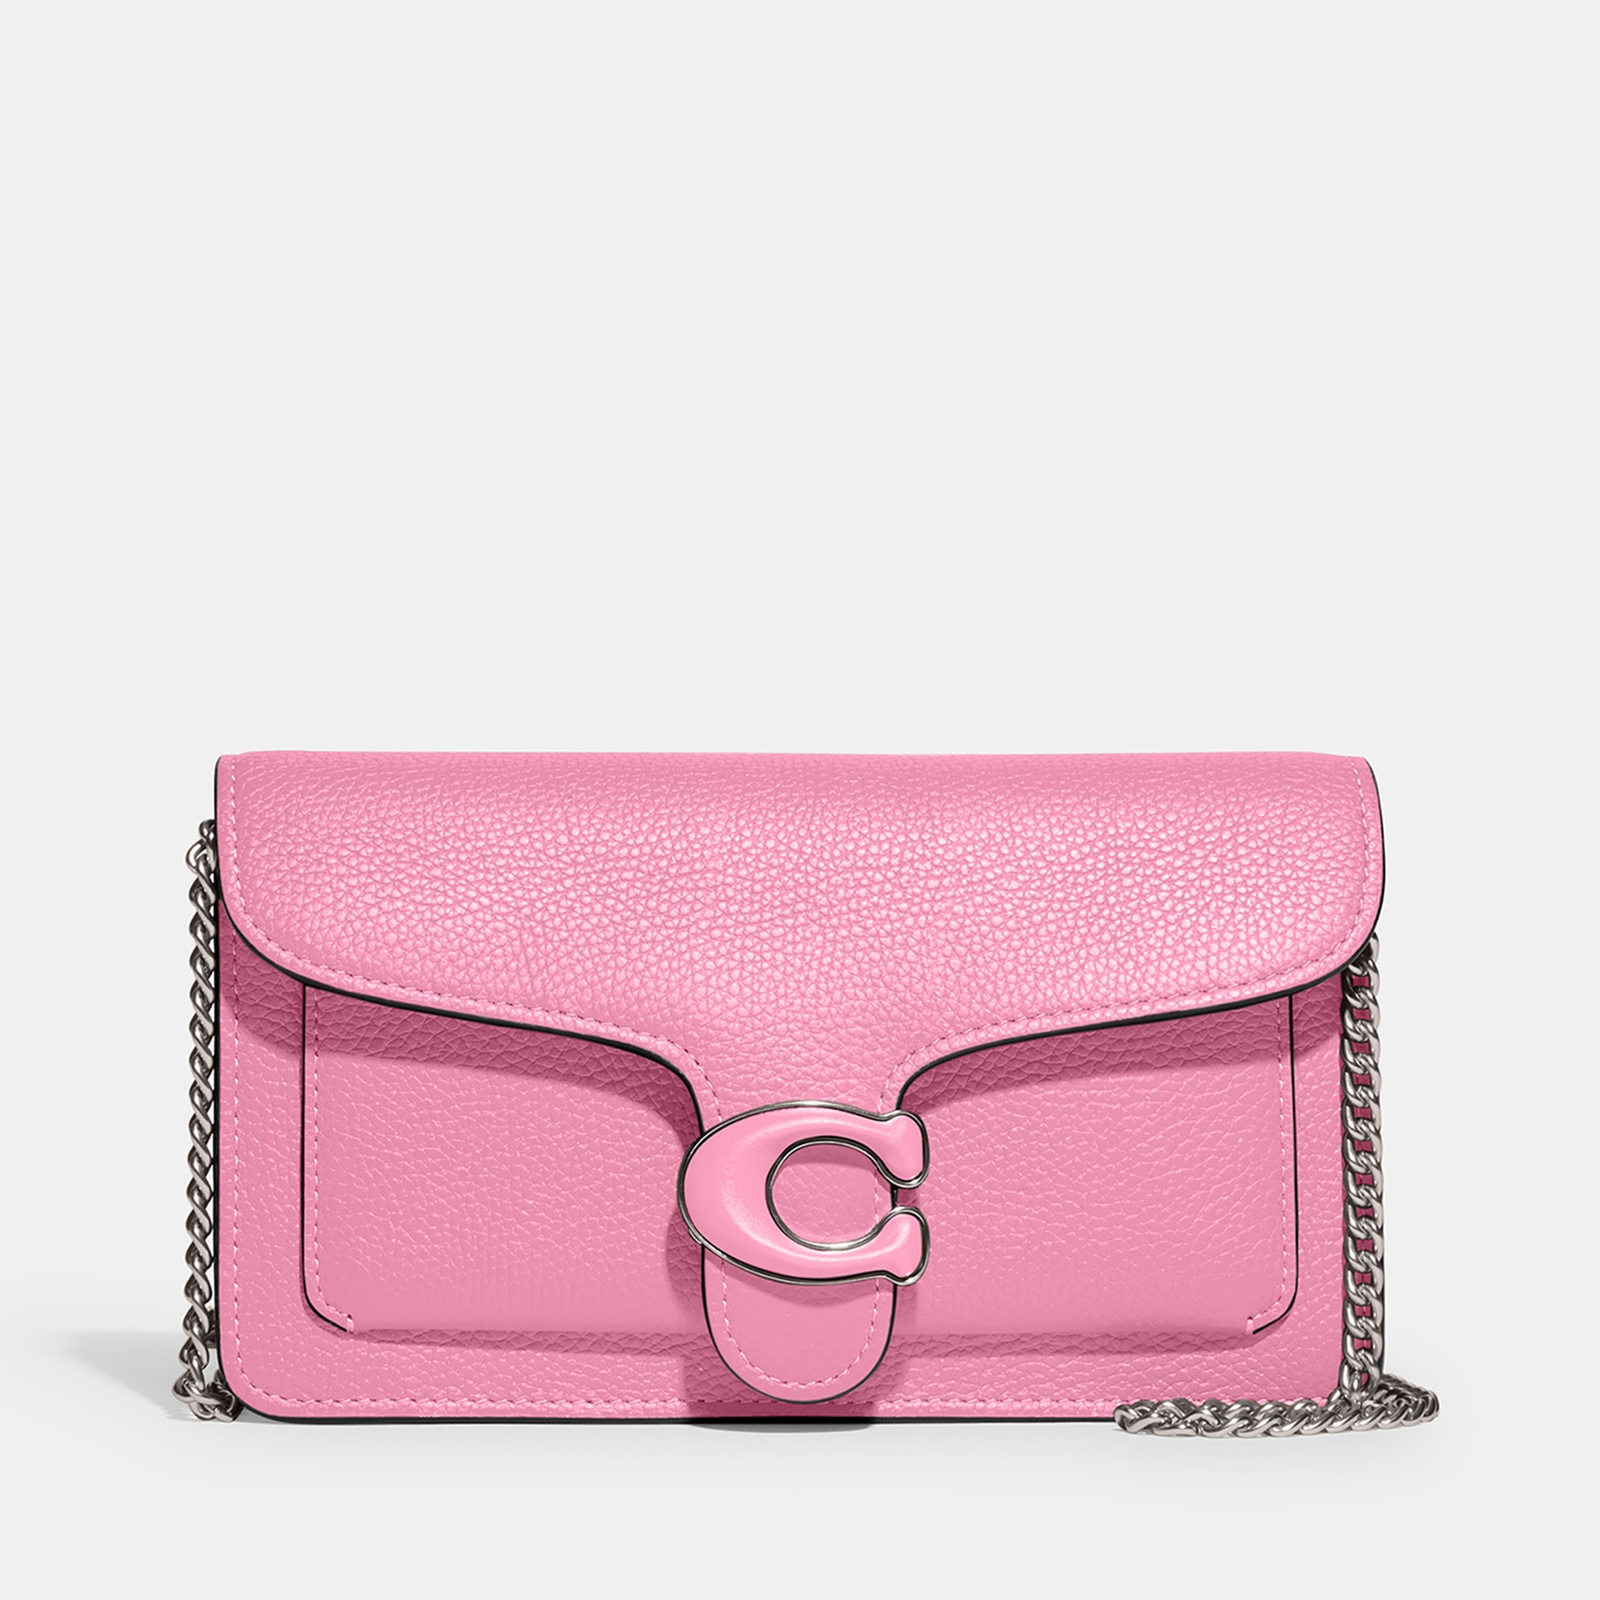 Coach Tabby Leather-Covered Chain Clutch Bag